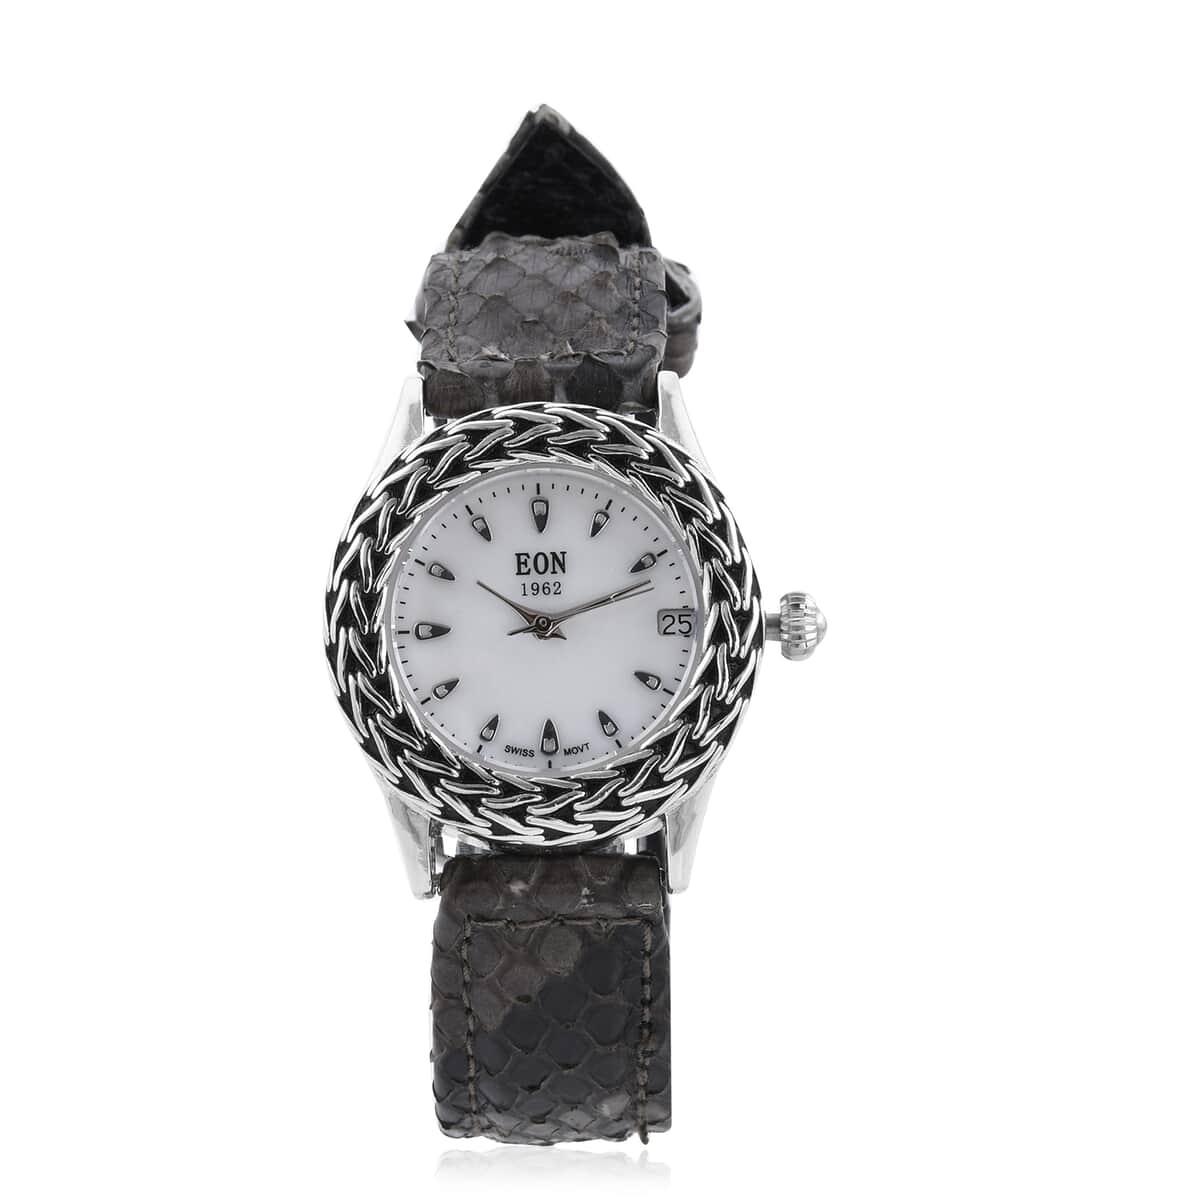 EON 1962 Swiss Movement Watch with Black and Grey Python Leather Band image number 0